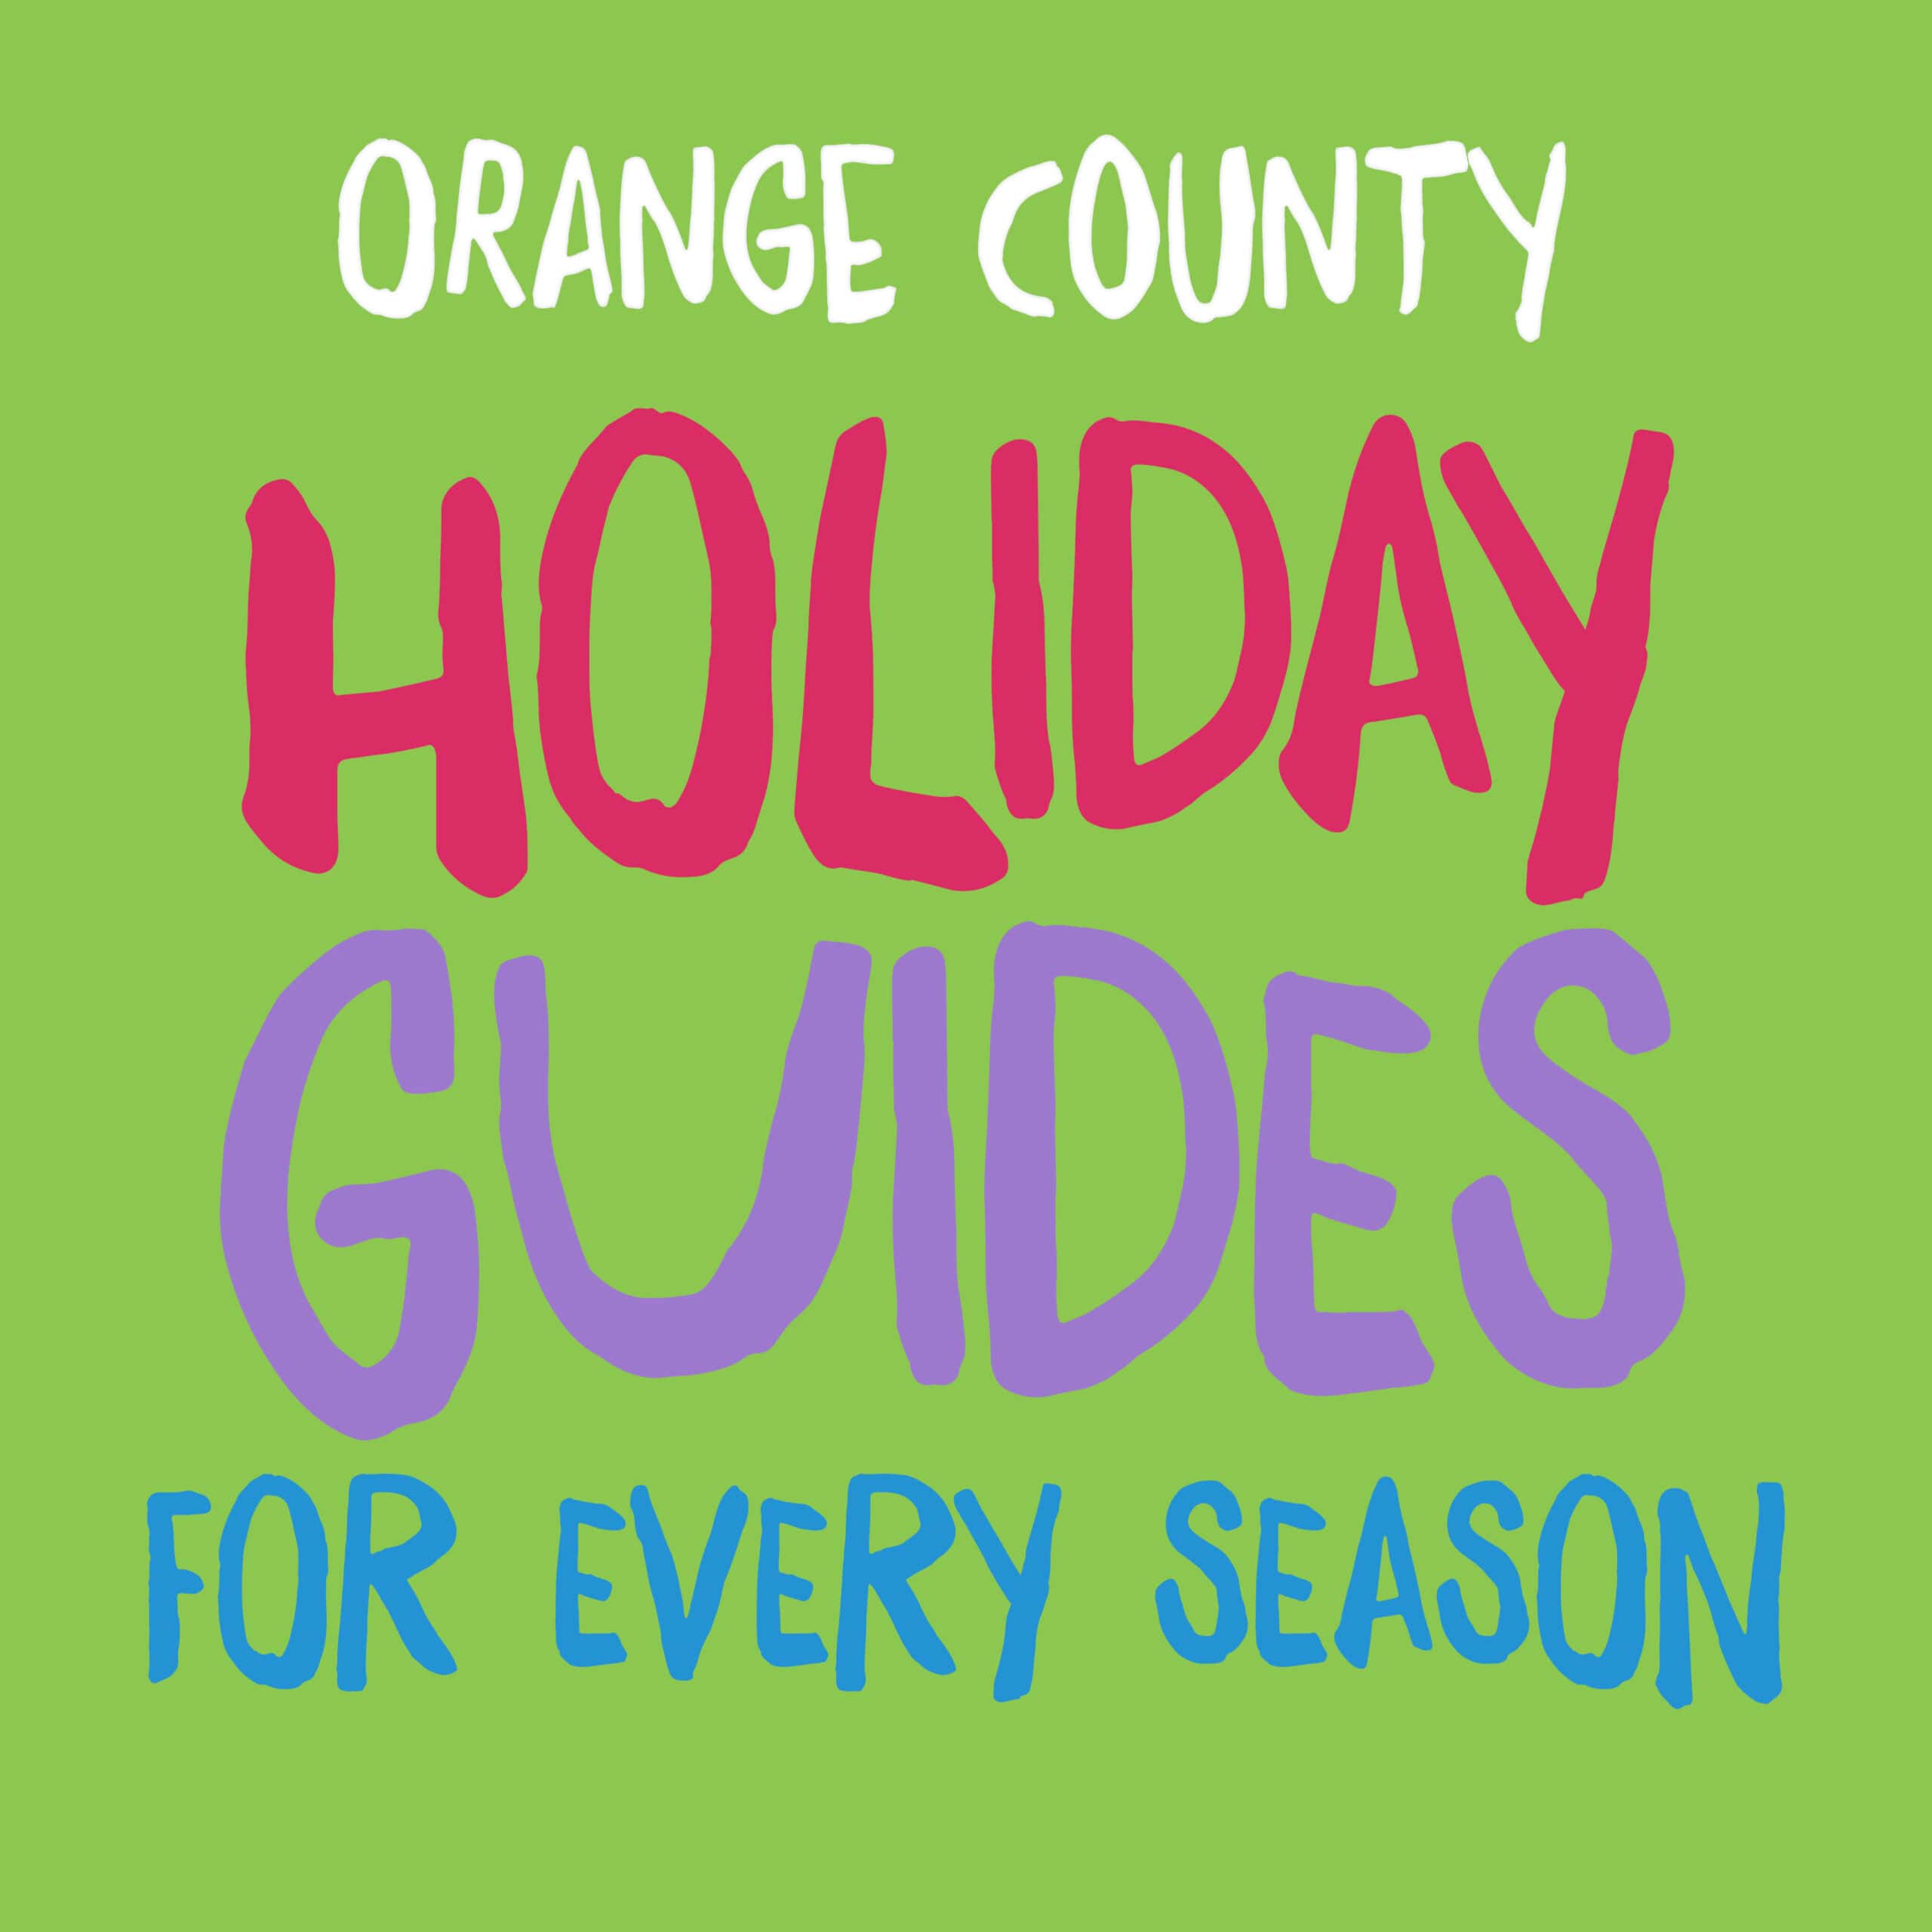 Orange County Holiday Guides for Every Holiday including Easter, Halloween, Christmas, Hanukkah, New Years and 4th of July